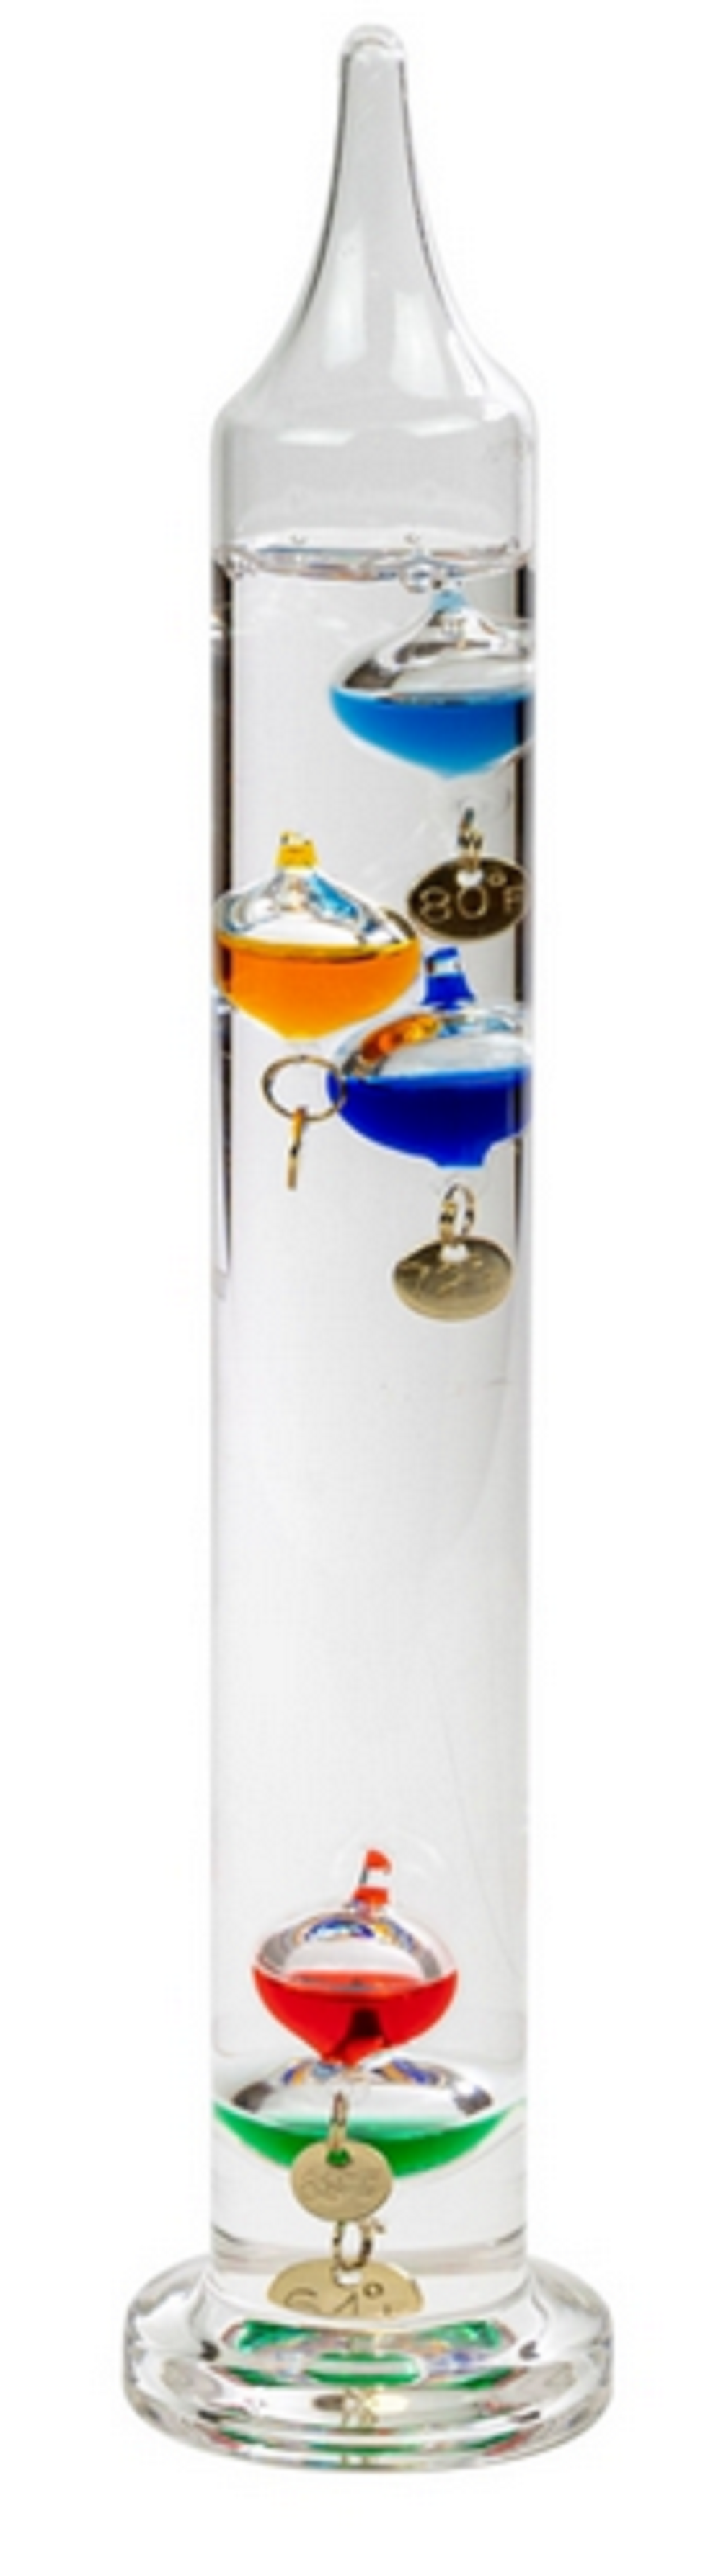 Funtime Gifts Galileo Thermometer